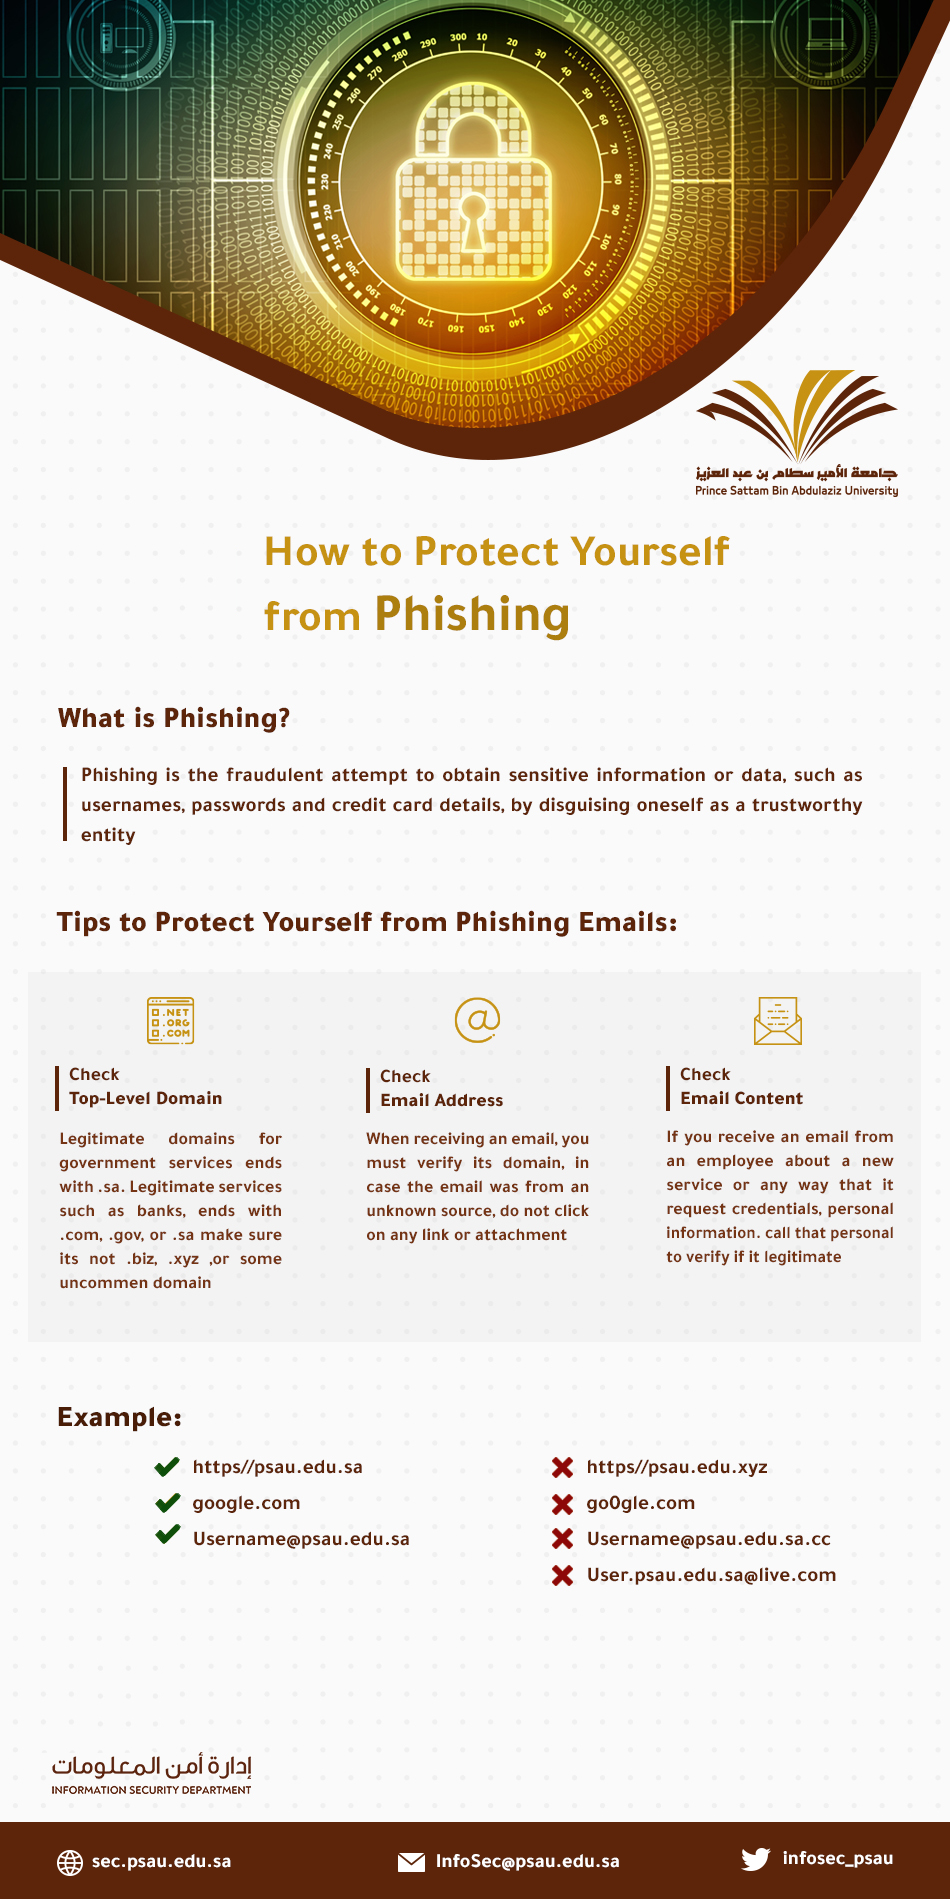 How to Protect Yourself from Phishing